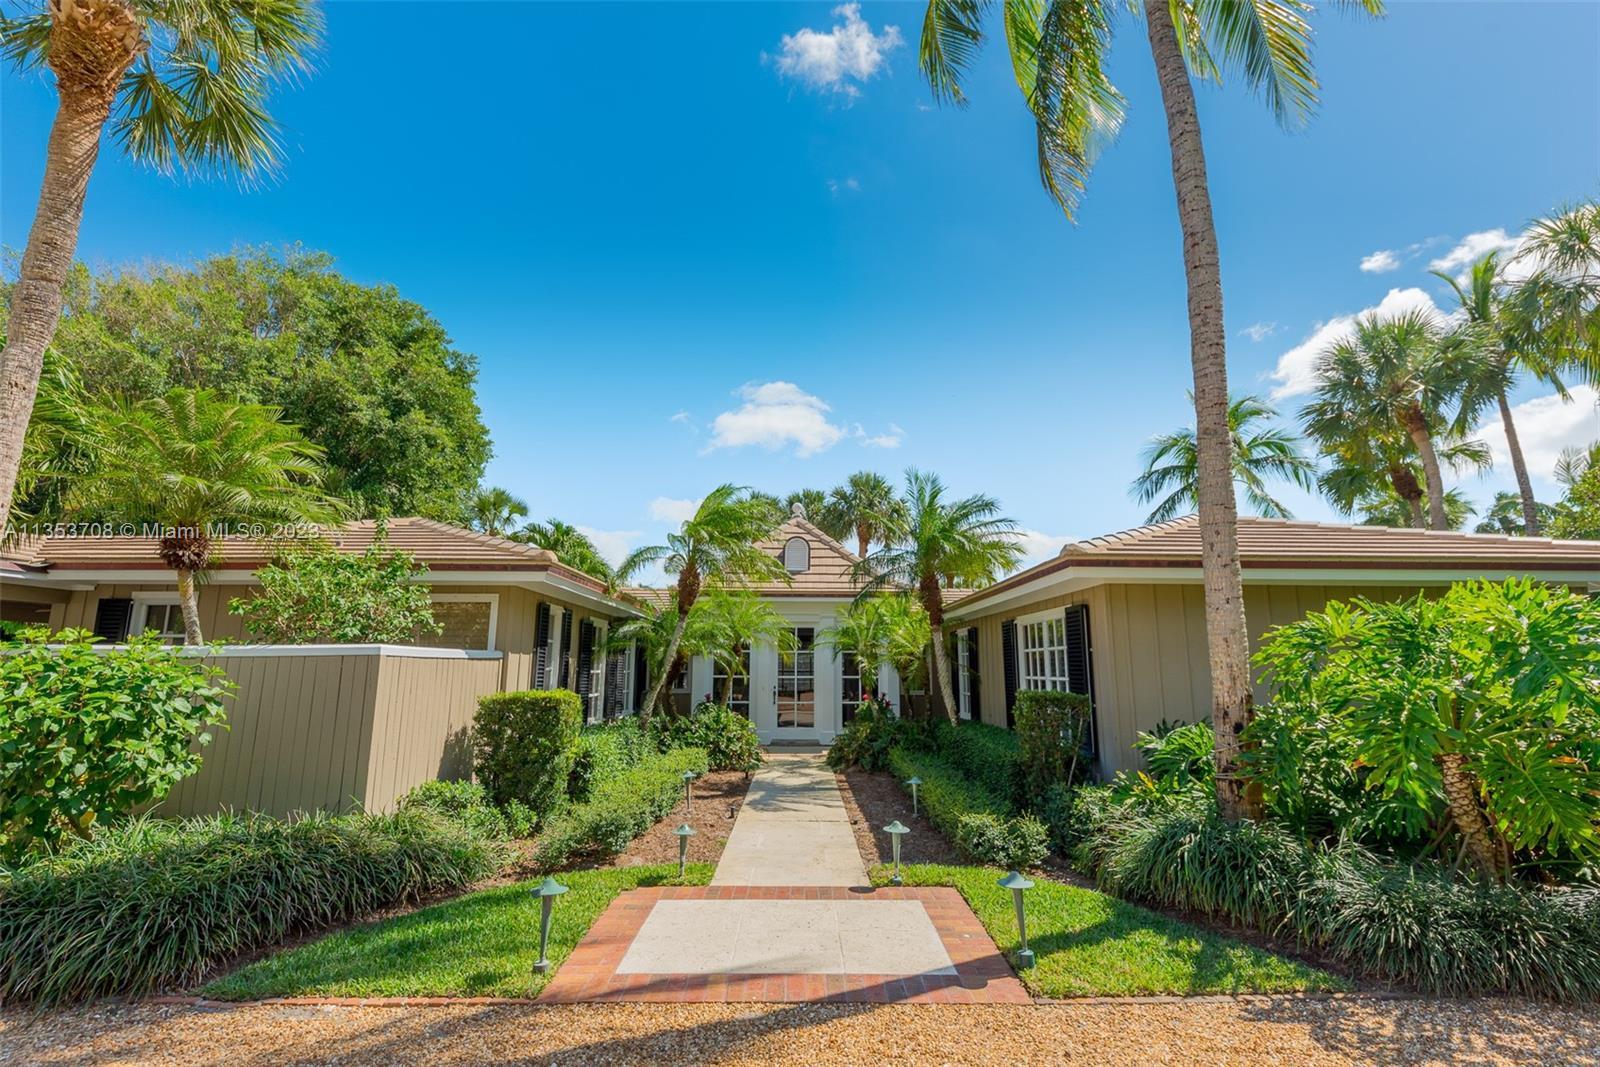 Rare opportunity for a compound on Jupiter Island!
Beautiful light and bright gem of a 3 bedroom ho